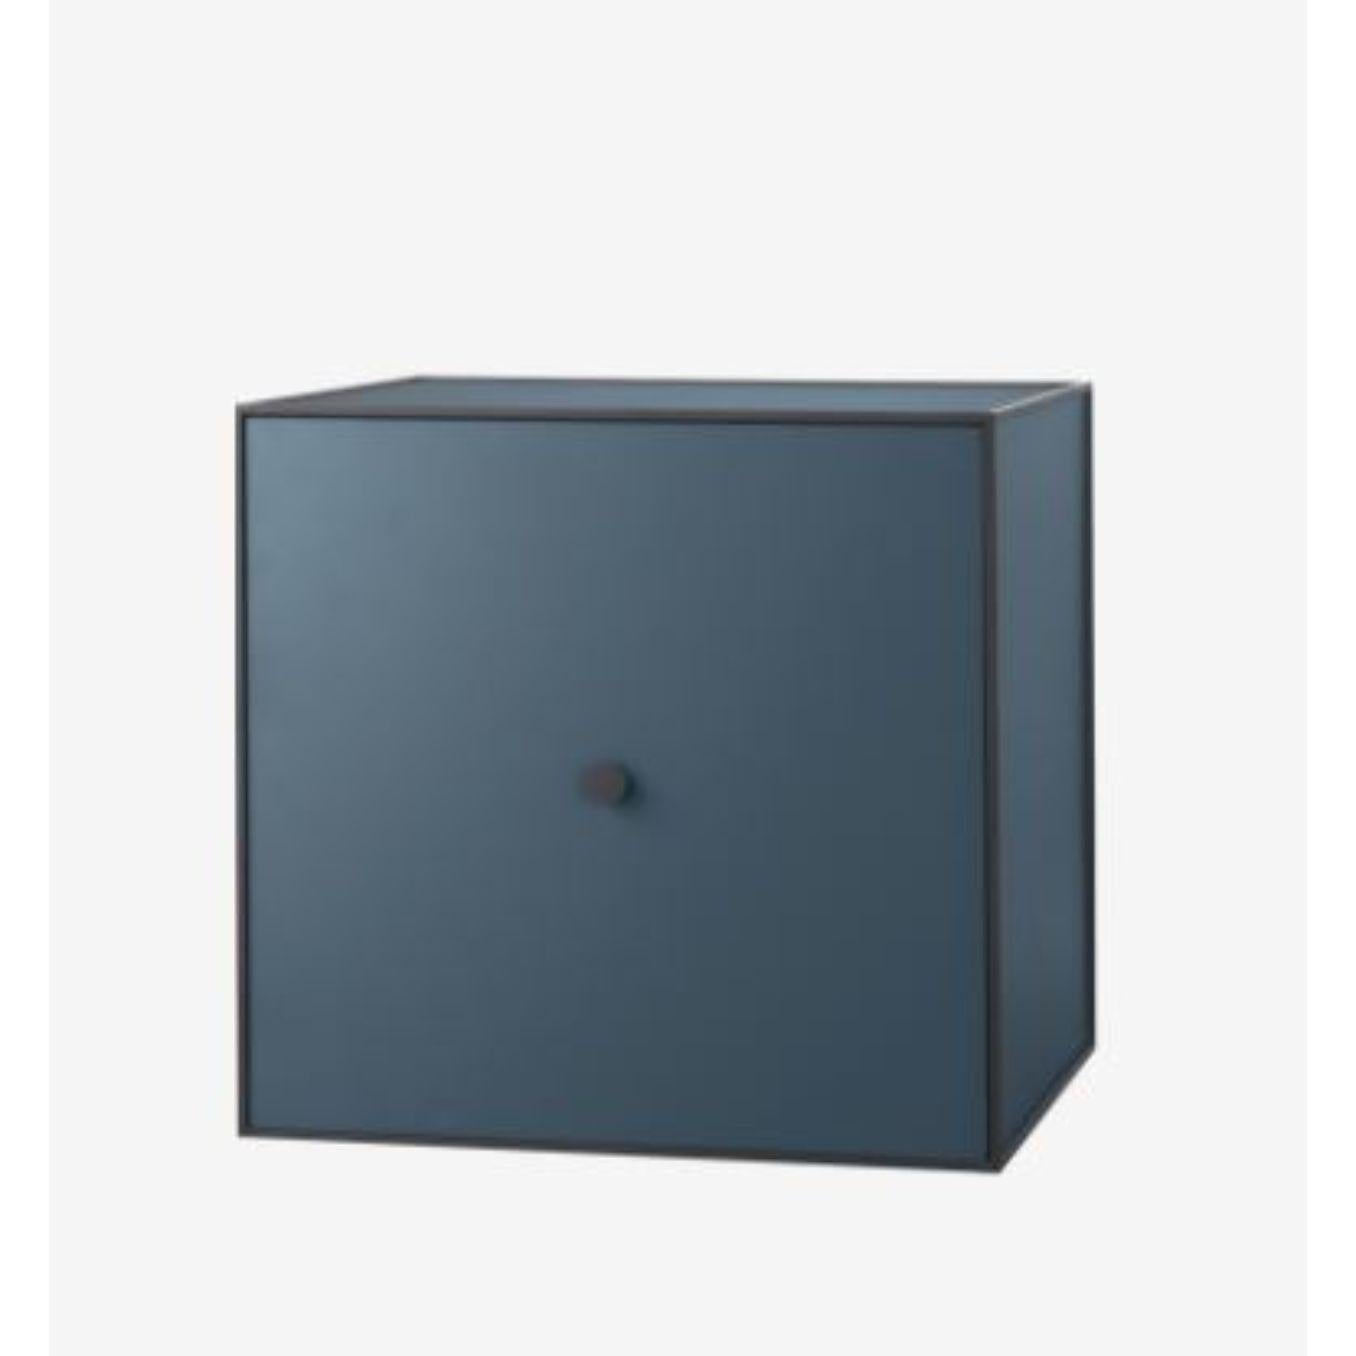 49 Fjord frame box with door / shelf by Lassen.
Dimensions: D 49 x W 42 x H 49 cm
Materials: Finér, Melamin, Melamin, Melamine, Metal, Veneer, Ash
Also available in different colours and dimensions. 
Weight: 17 Kg


By Lassen is a Danish